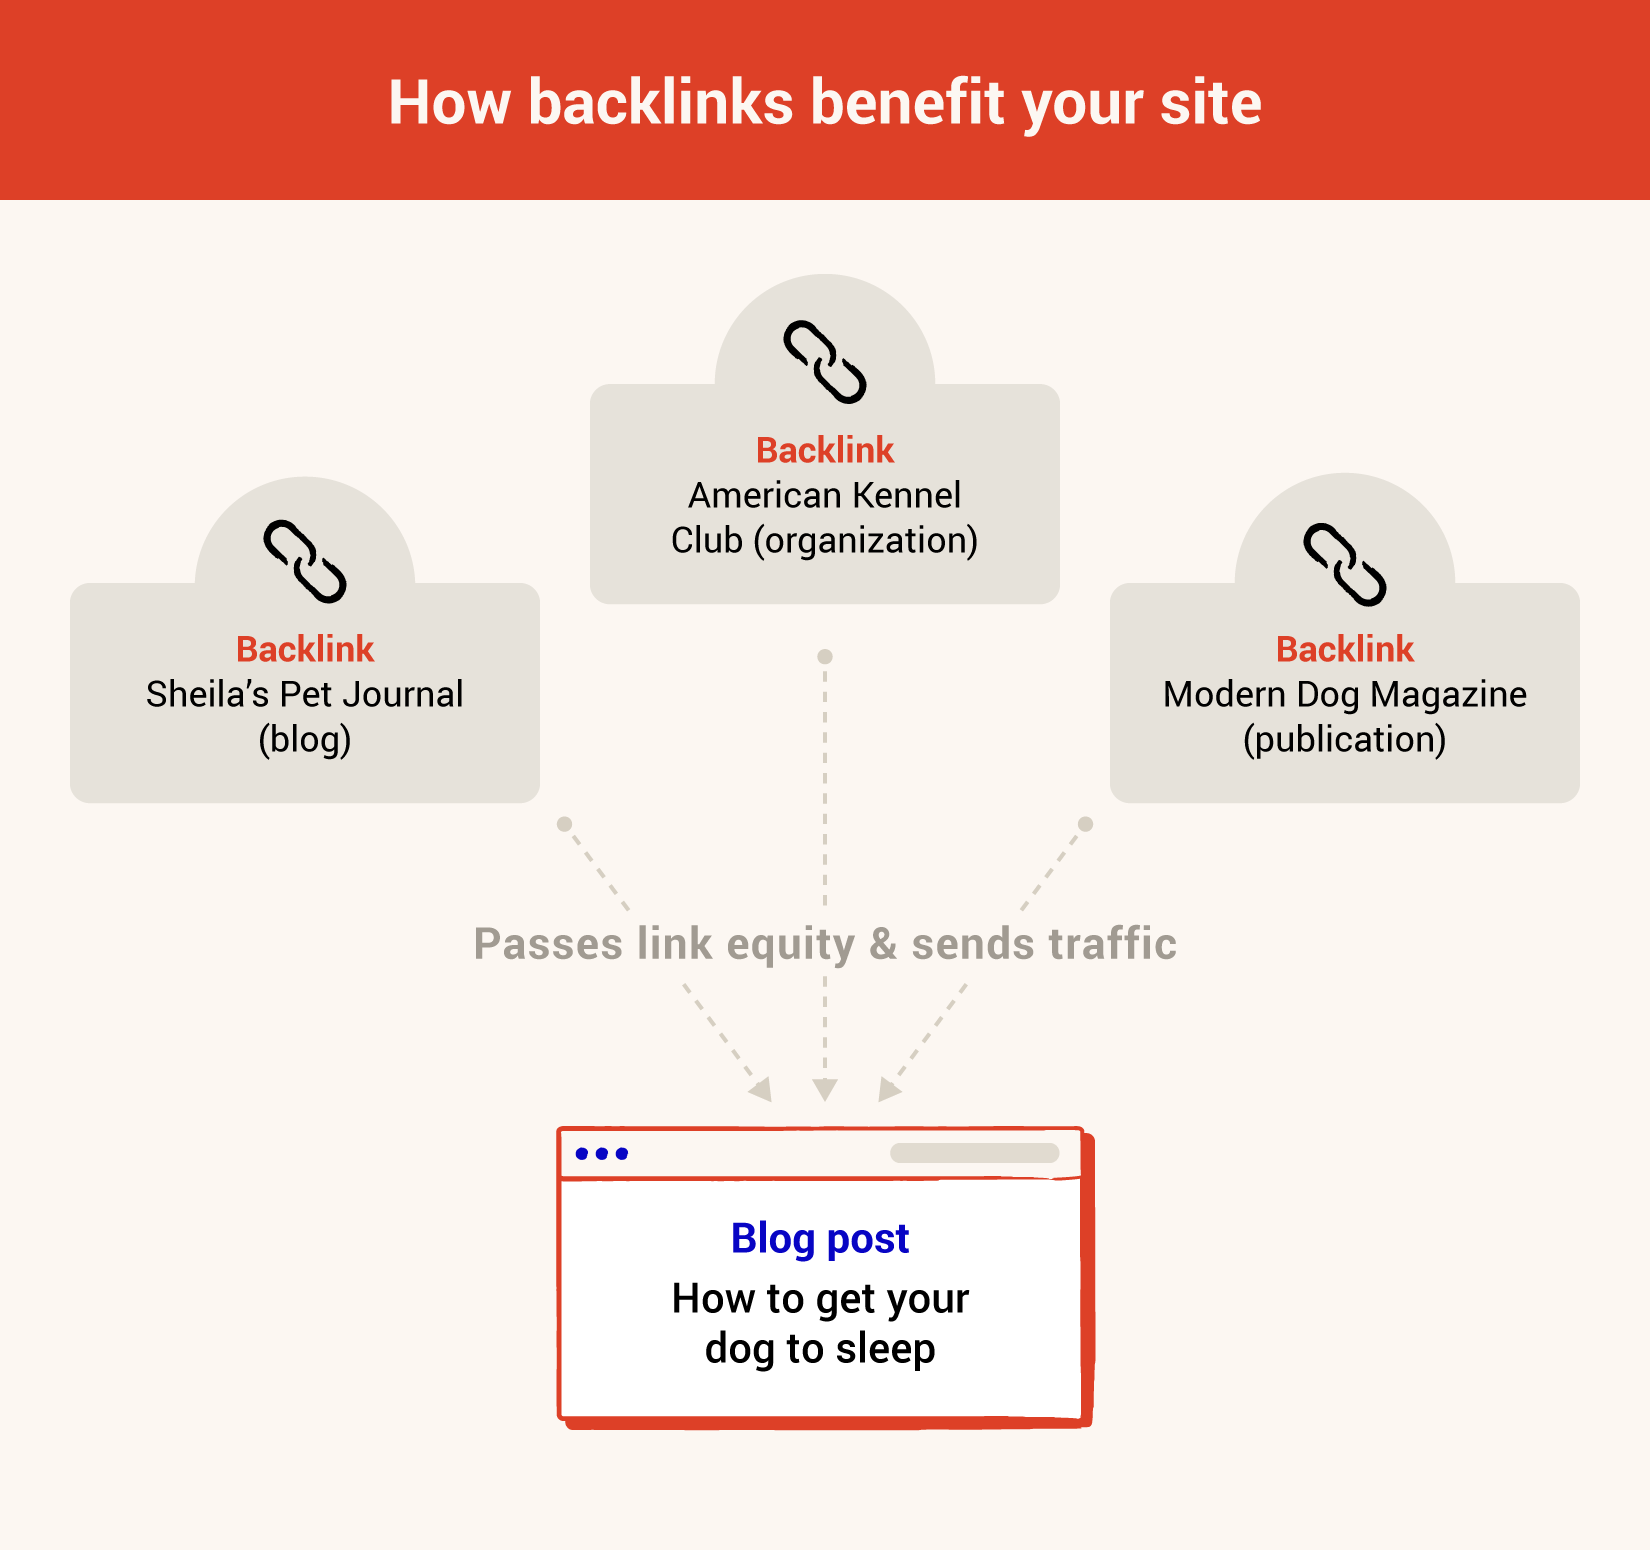 How backlinks benefit your site infographic